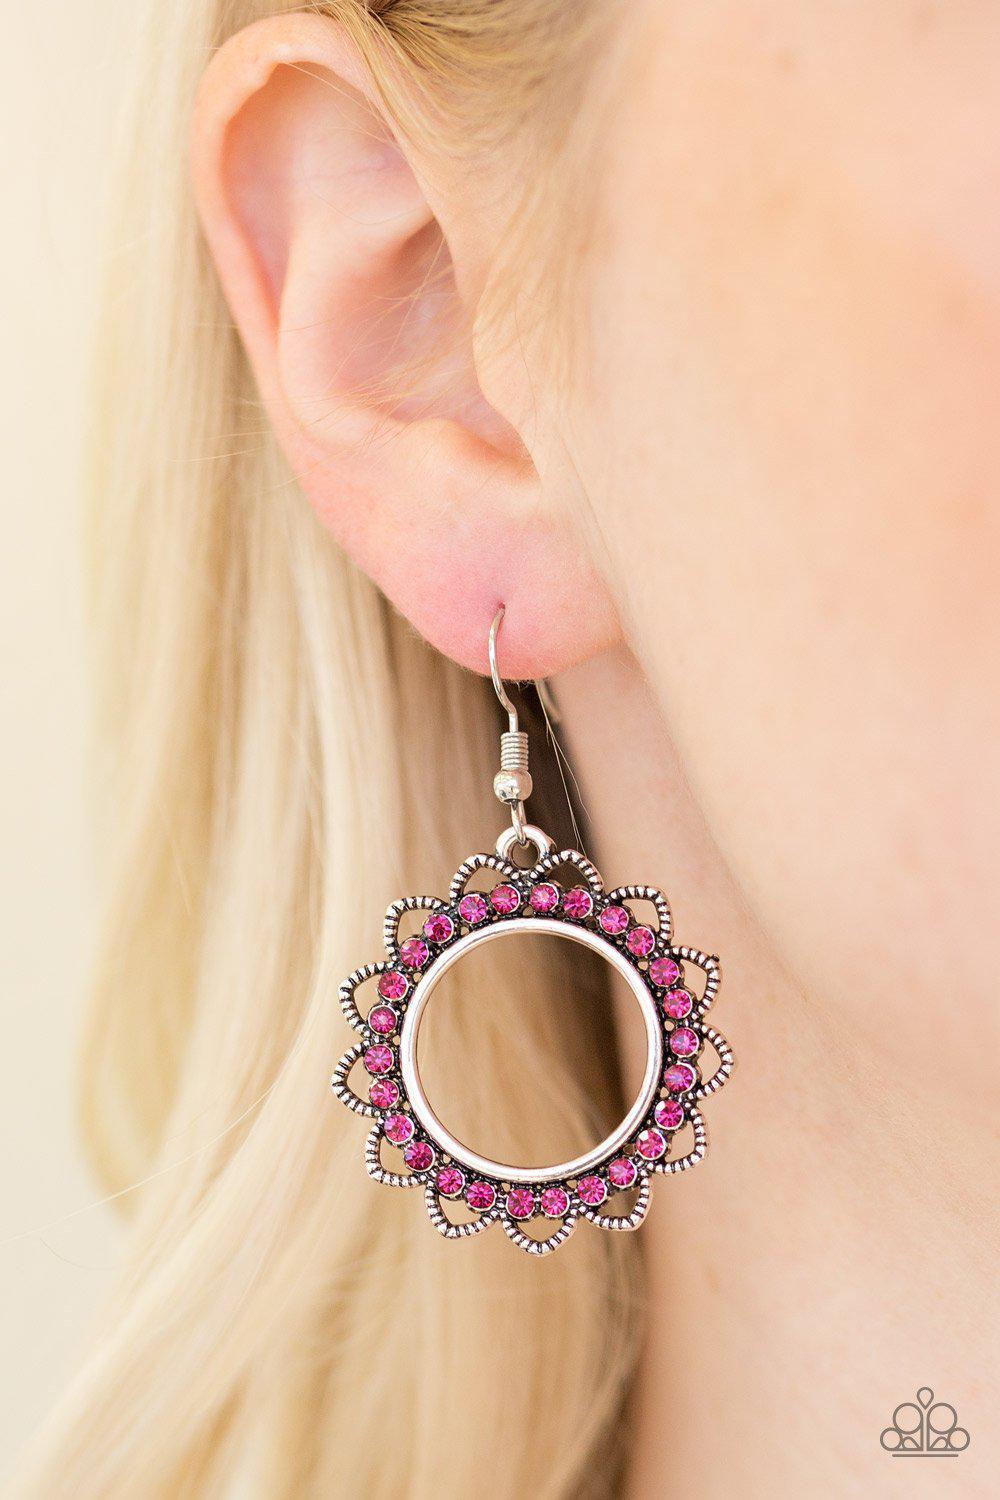 Bring Your Tambourine Pink Earrings - Paparazzi Accessories-CarasShop.com - $5 Jewelry by Cara Jewels